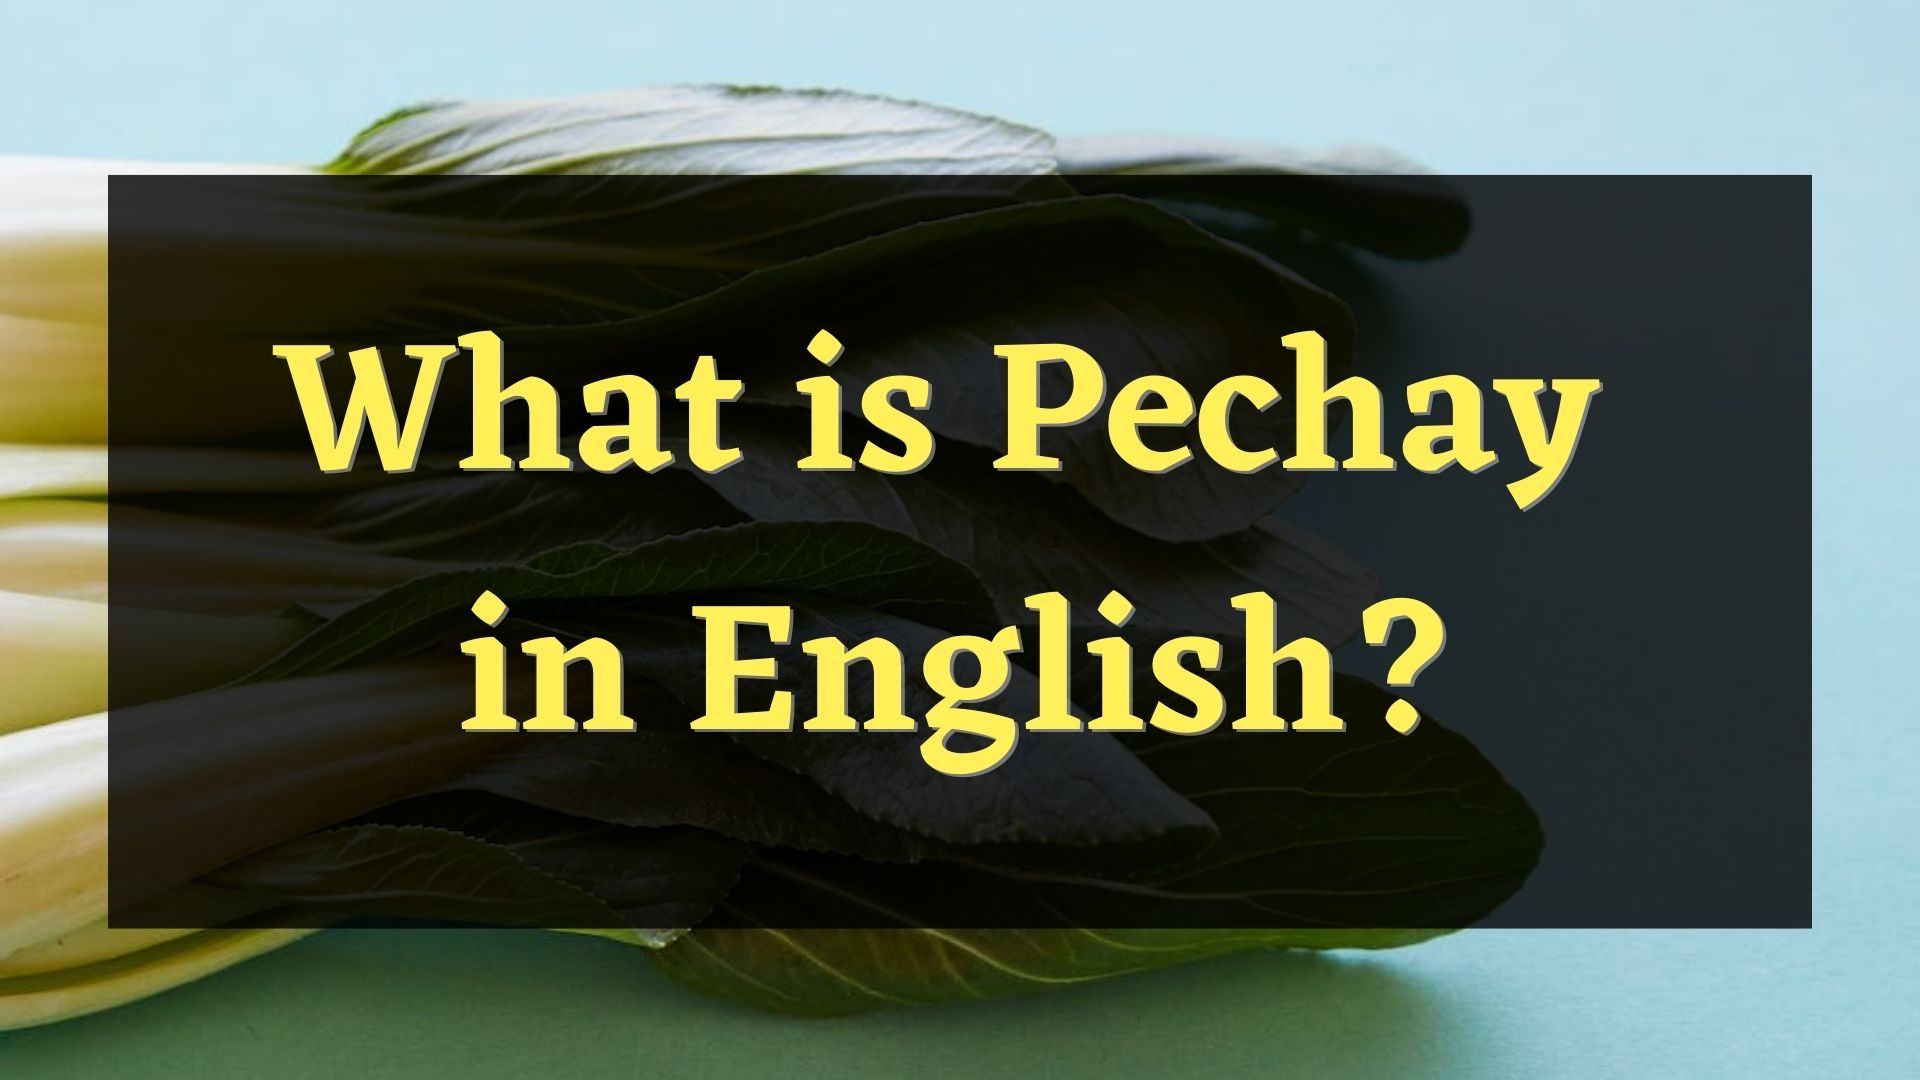 what is the english word for pechay